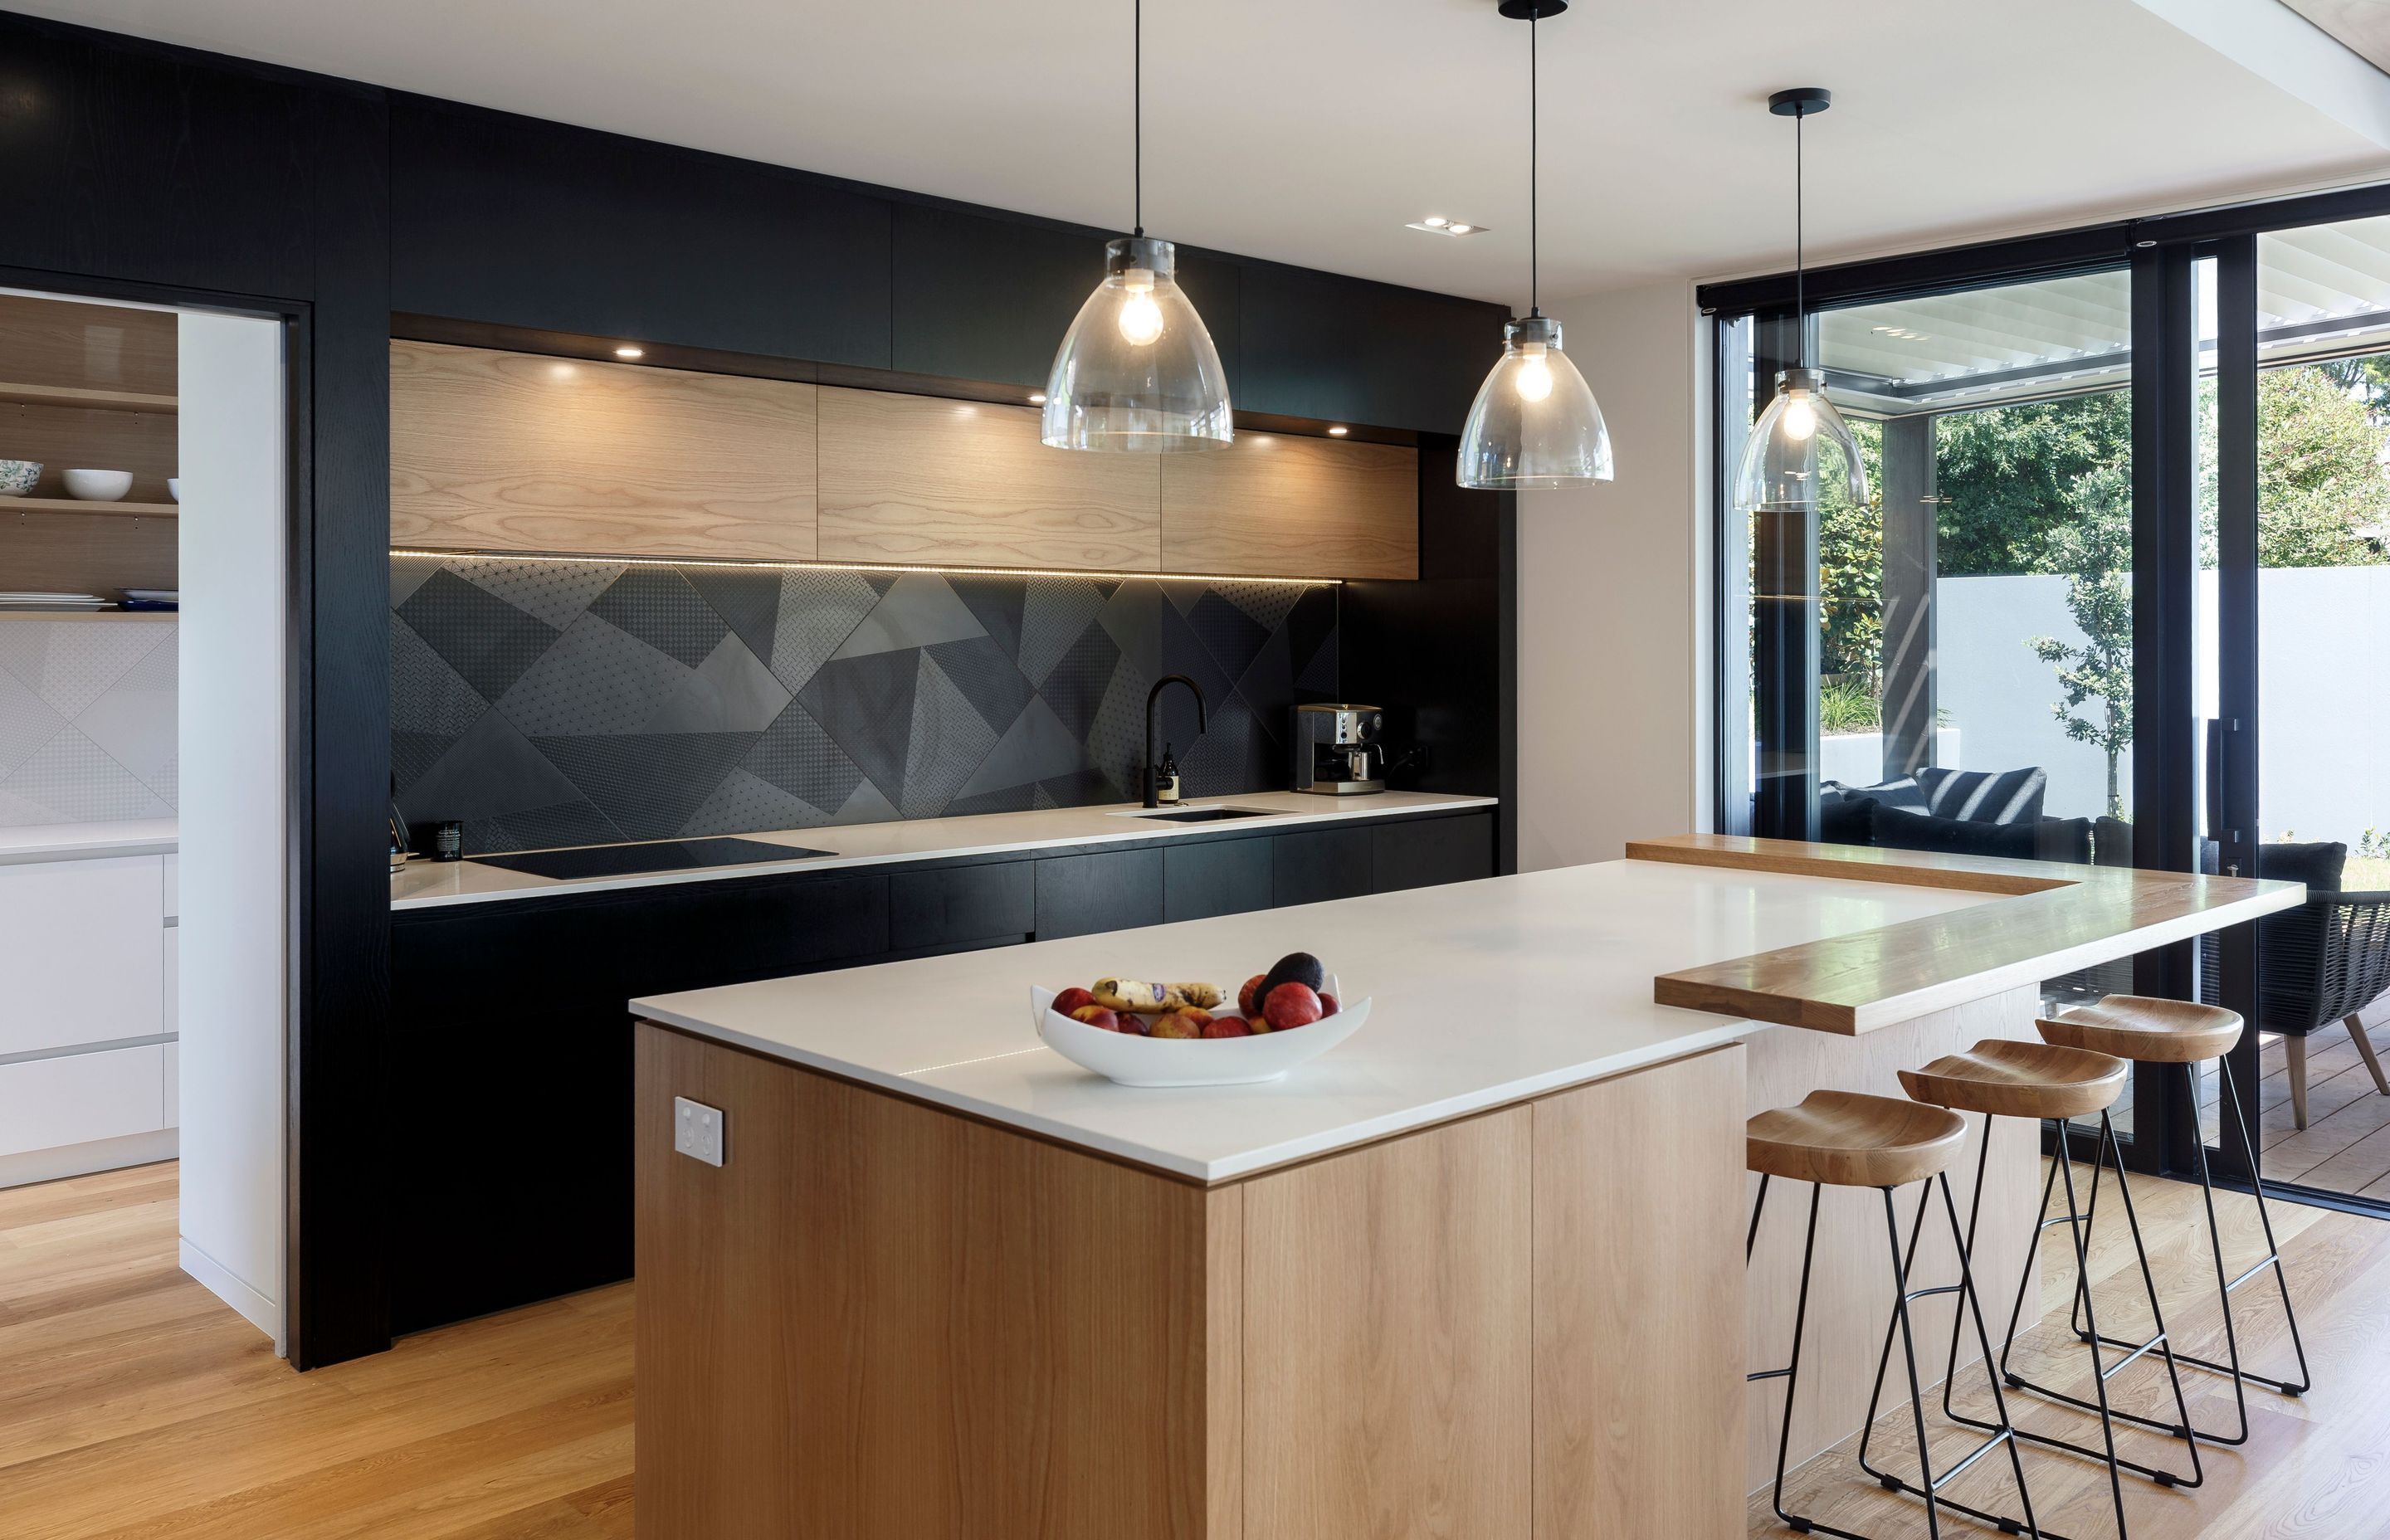 The kitchen and scullery combine natural timber with dramatic monochromatic black and white surfaces.